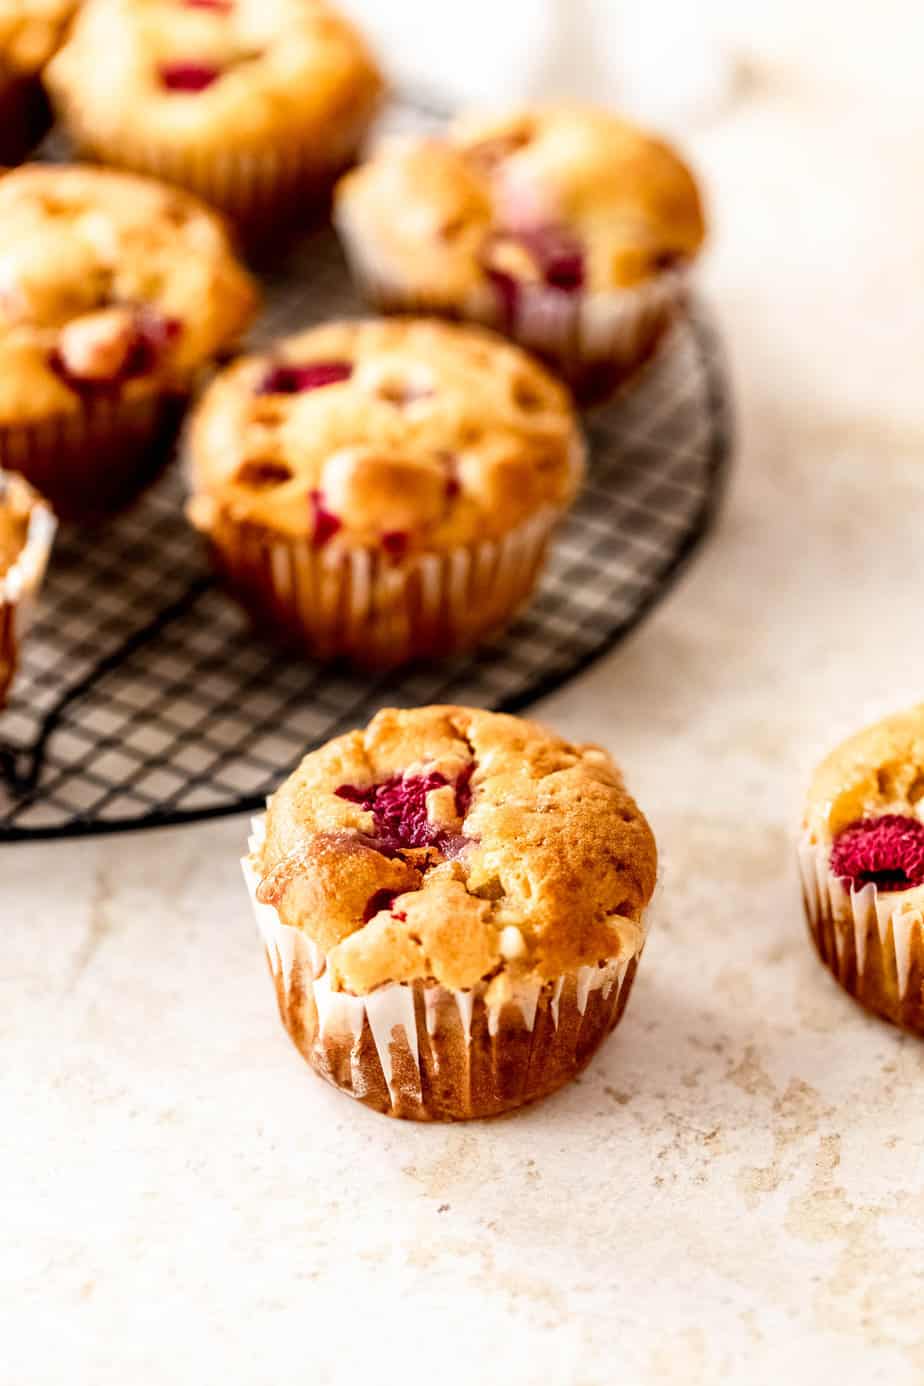 Raspberry and white chocolate muffins in a paper liner.